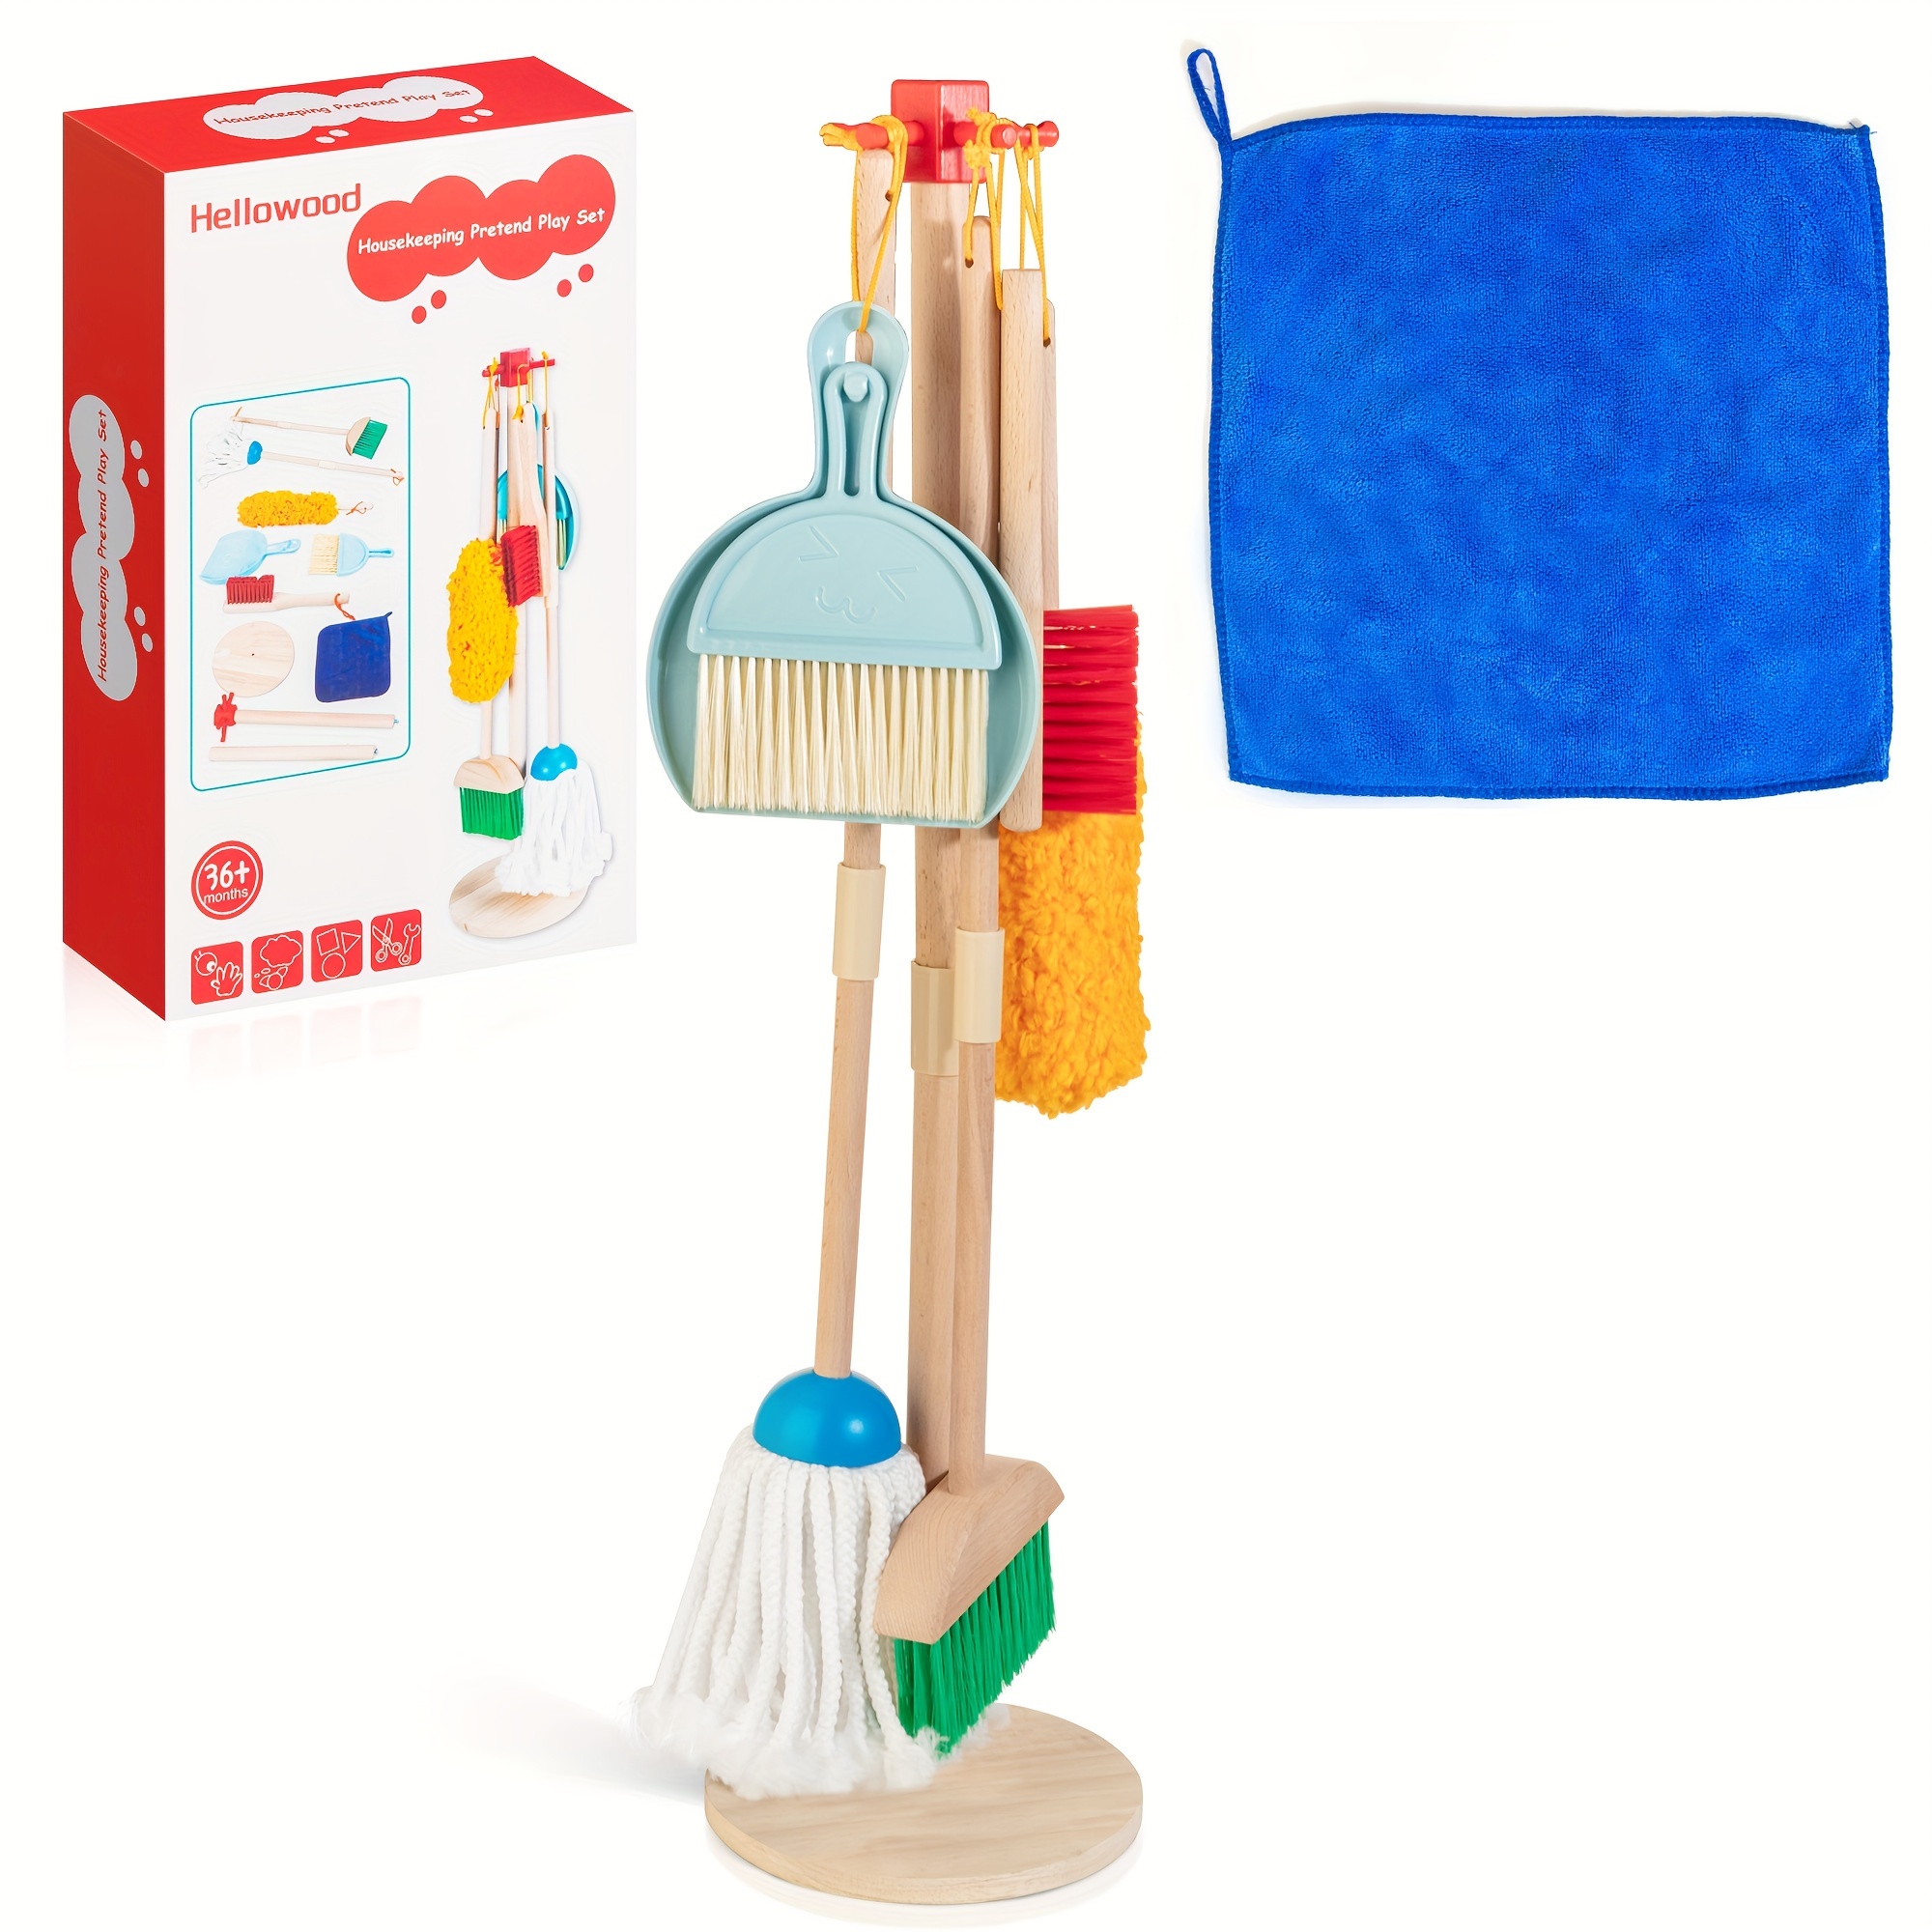 

8 Pieces Wooden Housekeeping Pretend Play Set For Kids, Extended Mop&broom, Detachable Toddler Toy Cleaning Set, Housework Role Play Set Gift Fine Motor Skill Christmas Gift